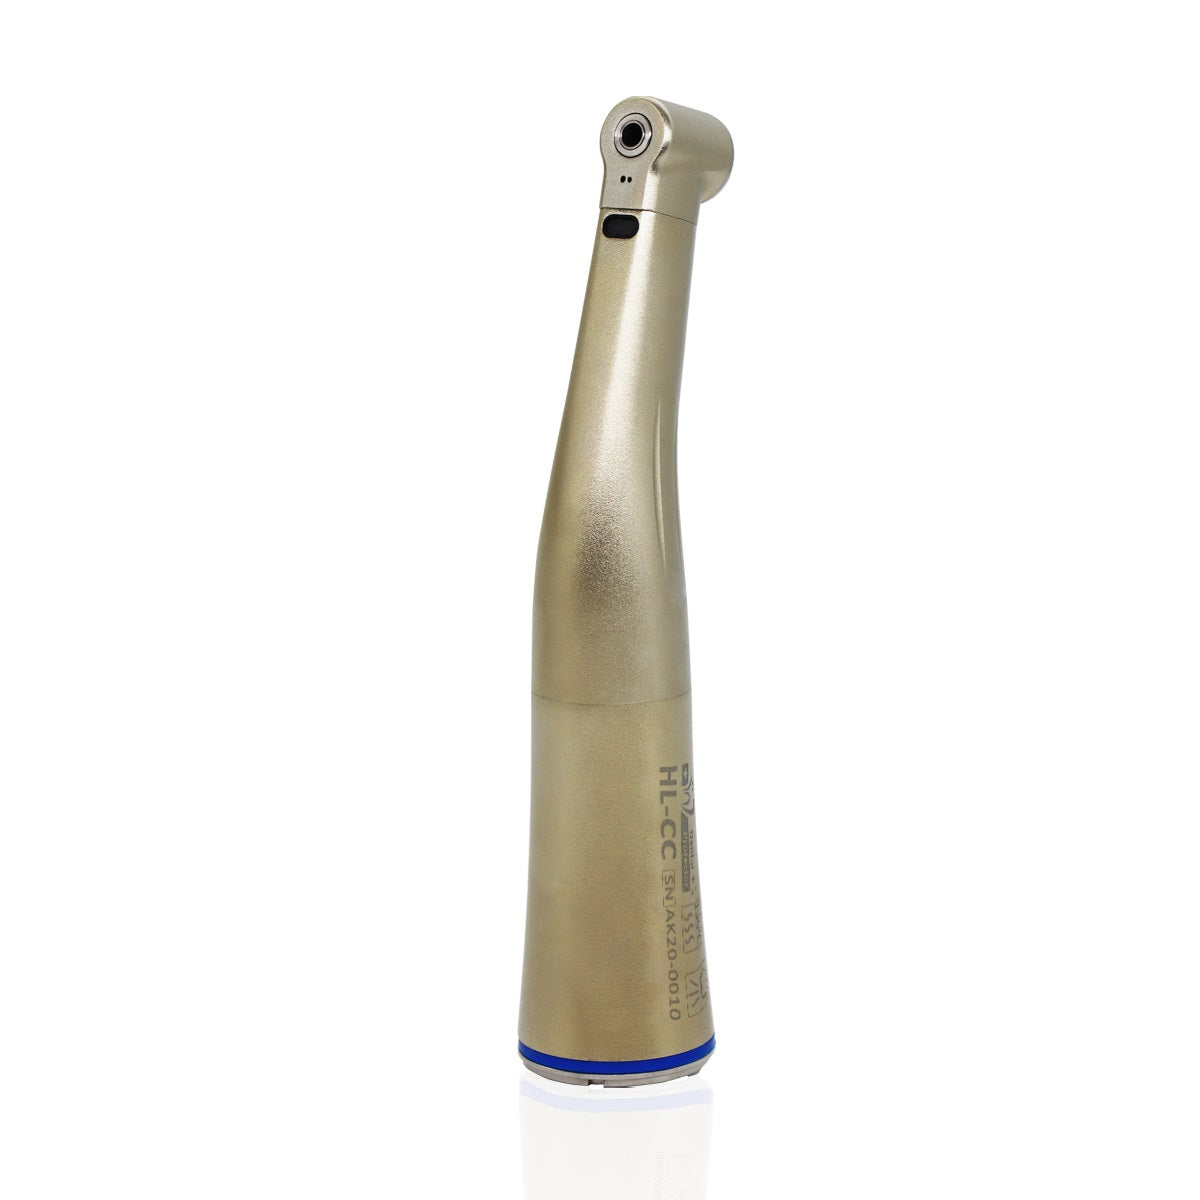 HL-CC Low Speed Contra Angel Dental Handpiece With Optical Fiber